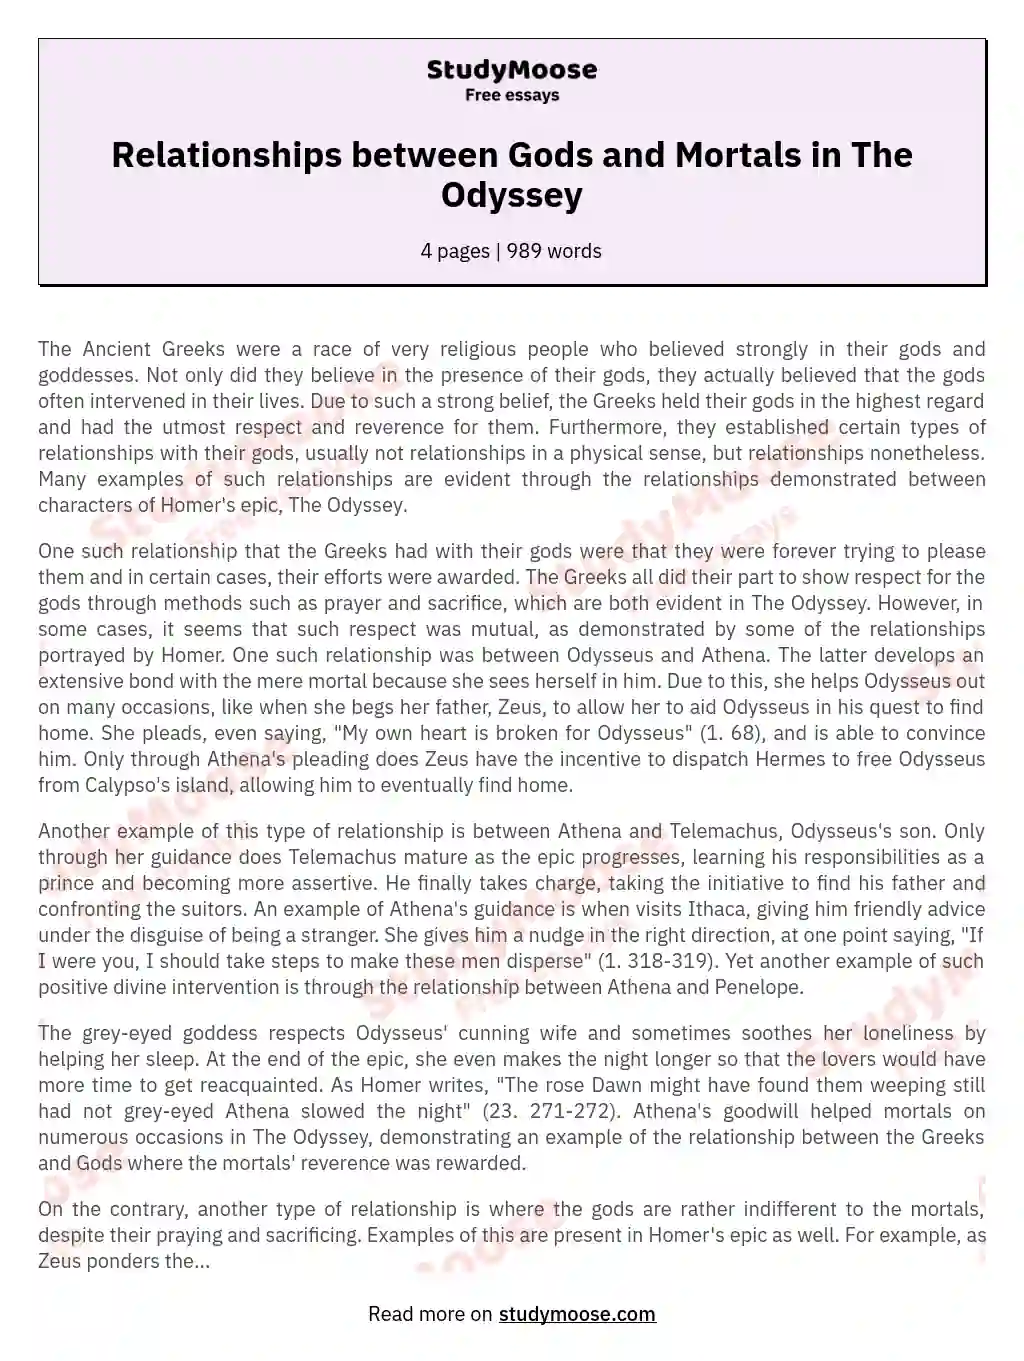 Relationships between Gods and Mortals in The Odyssey essay